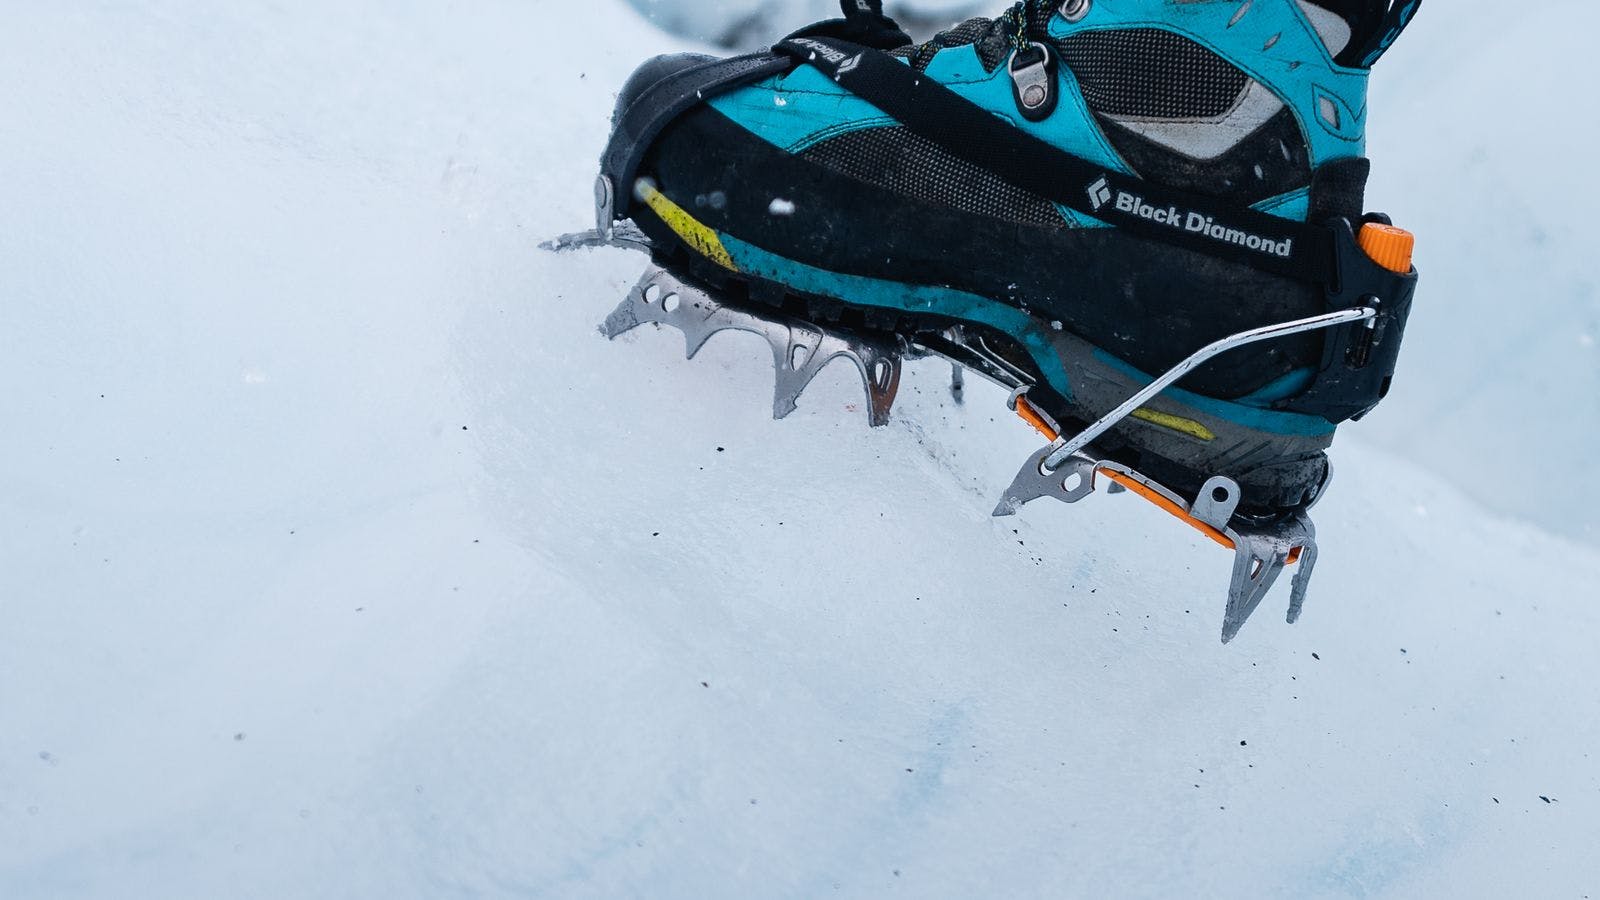 crampons on blue boots on glacier hiking tour in Iceland